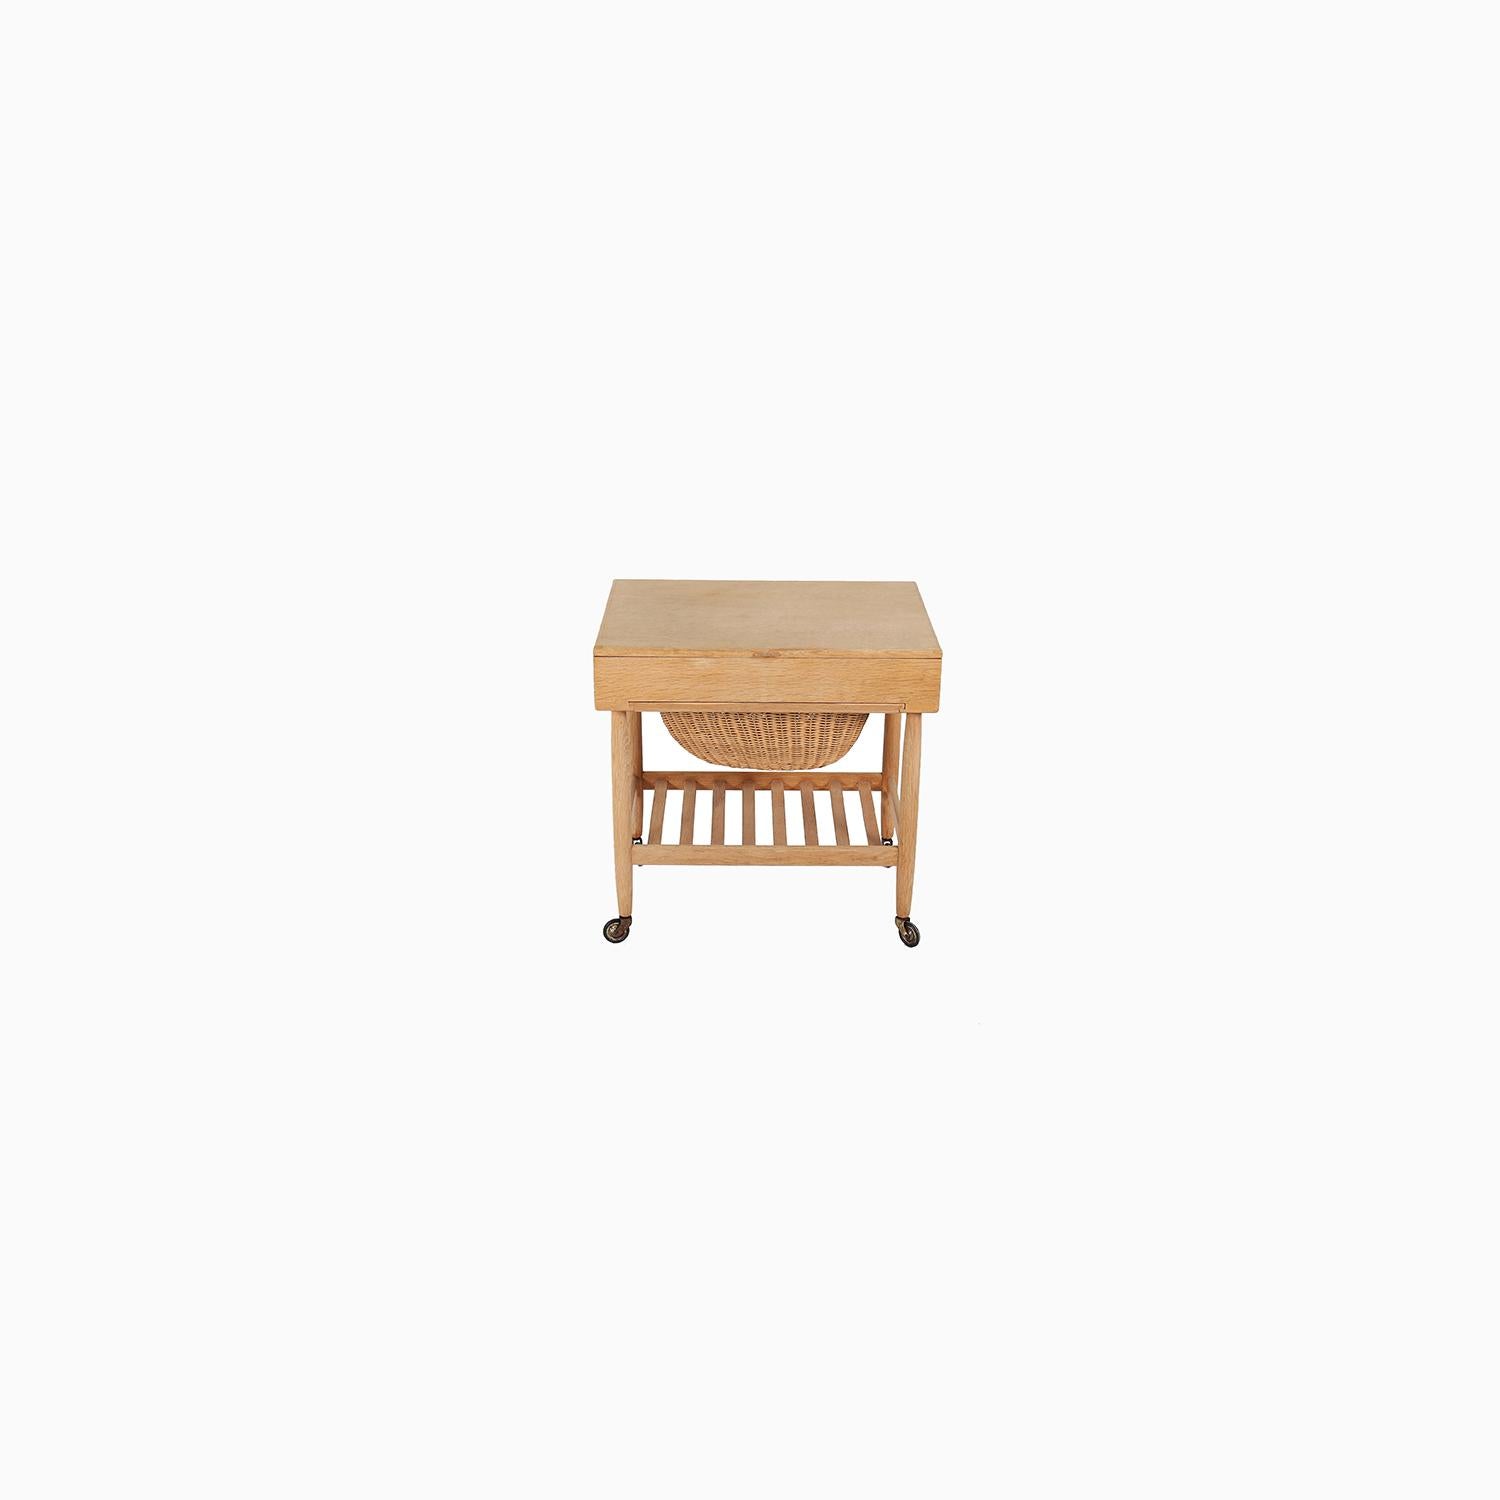 A Danish Modern sewing table designed by Ejvind Johansson. A very functional piece of design regardless if you use it for sewing. Constructed in oak with a soap finish. This piece will be cleaned up upon purchase.


Professional, skilled